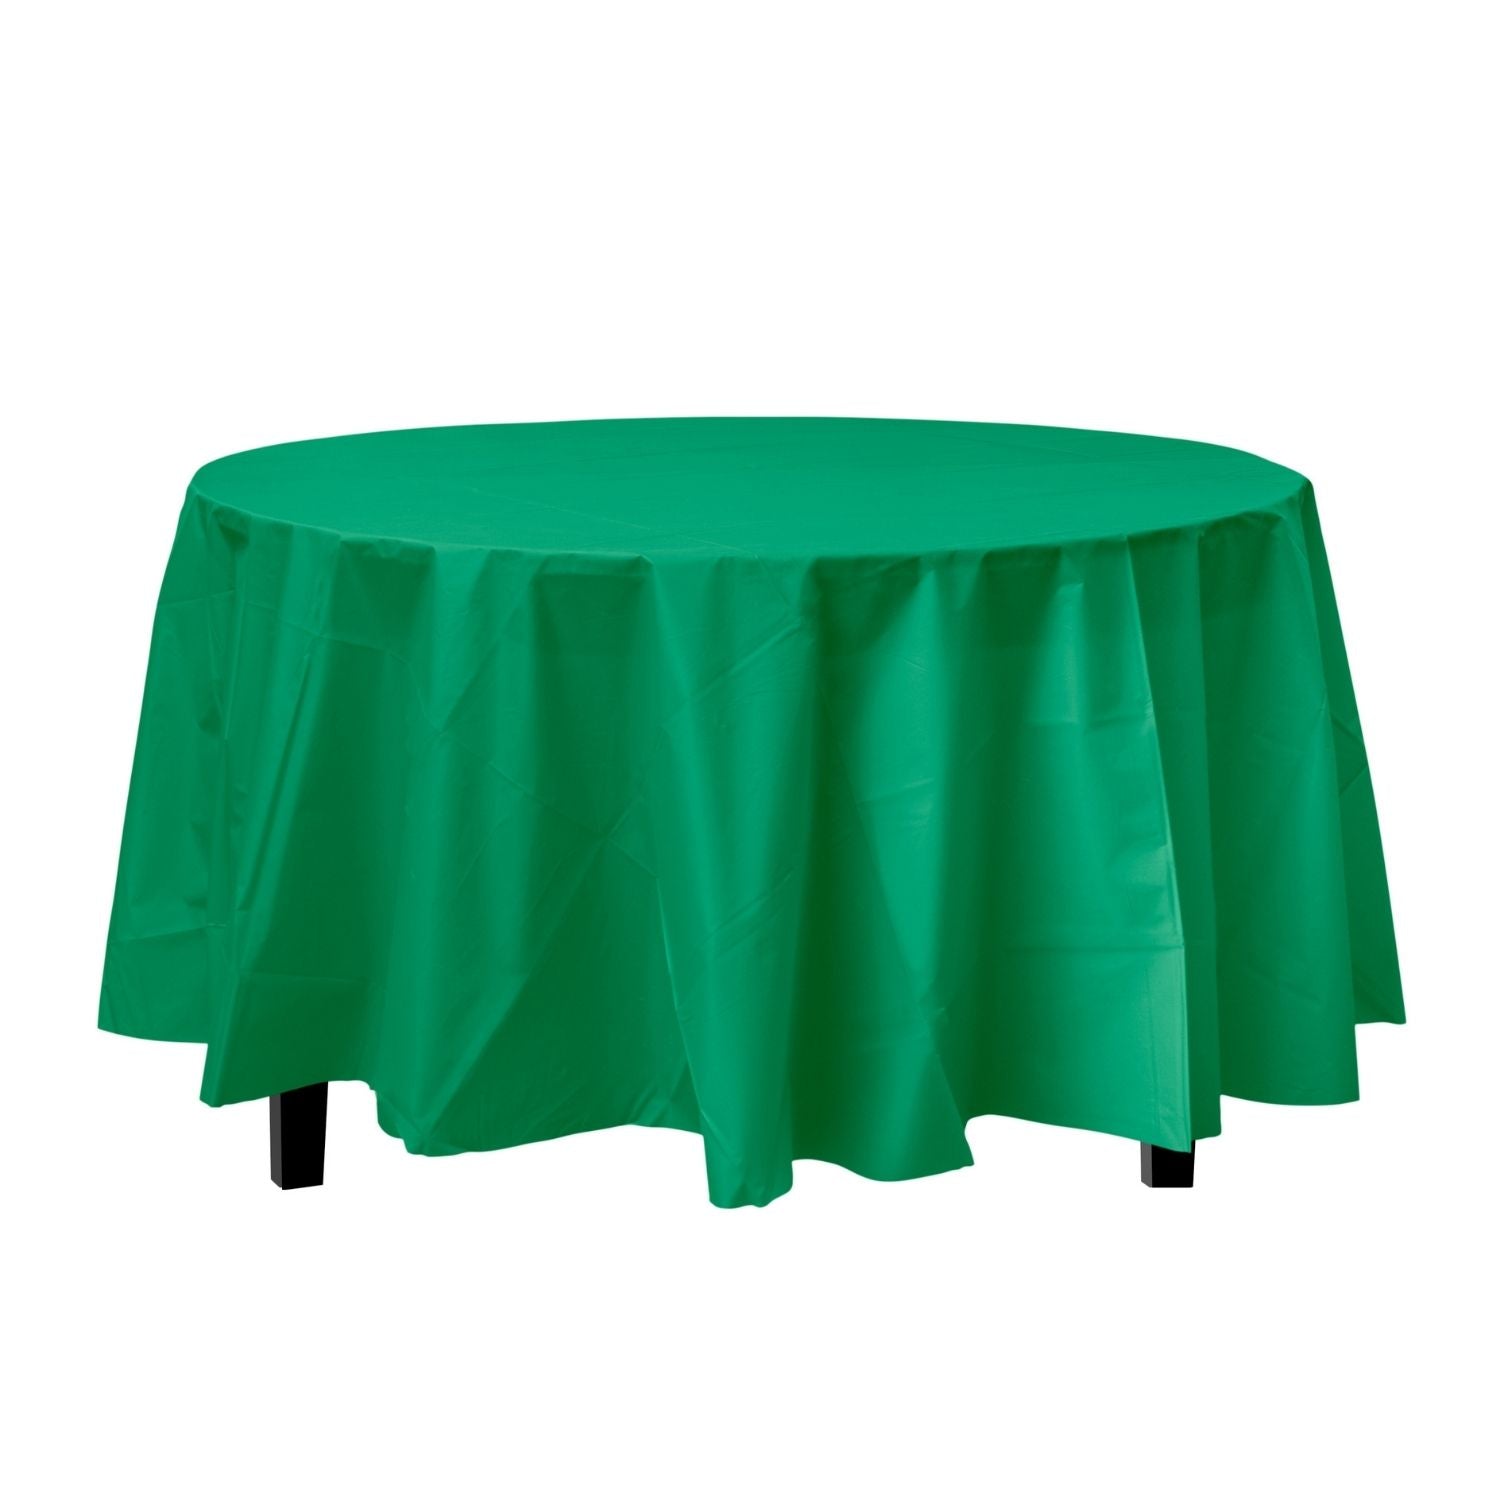 Emerald Green Round Plastic Tablecloth | 48 Count